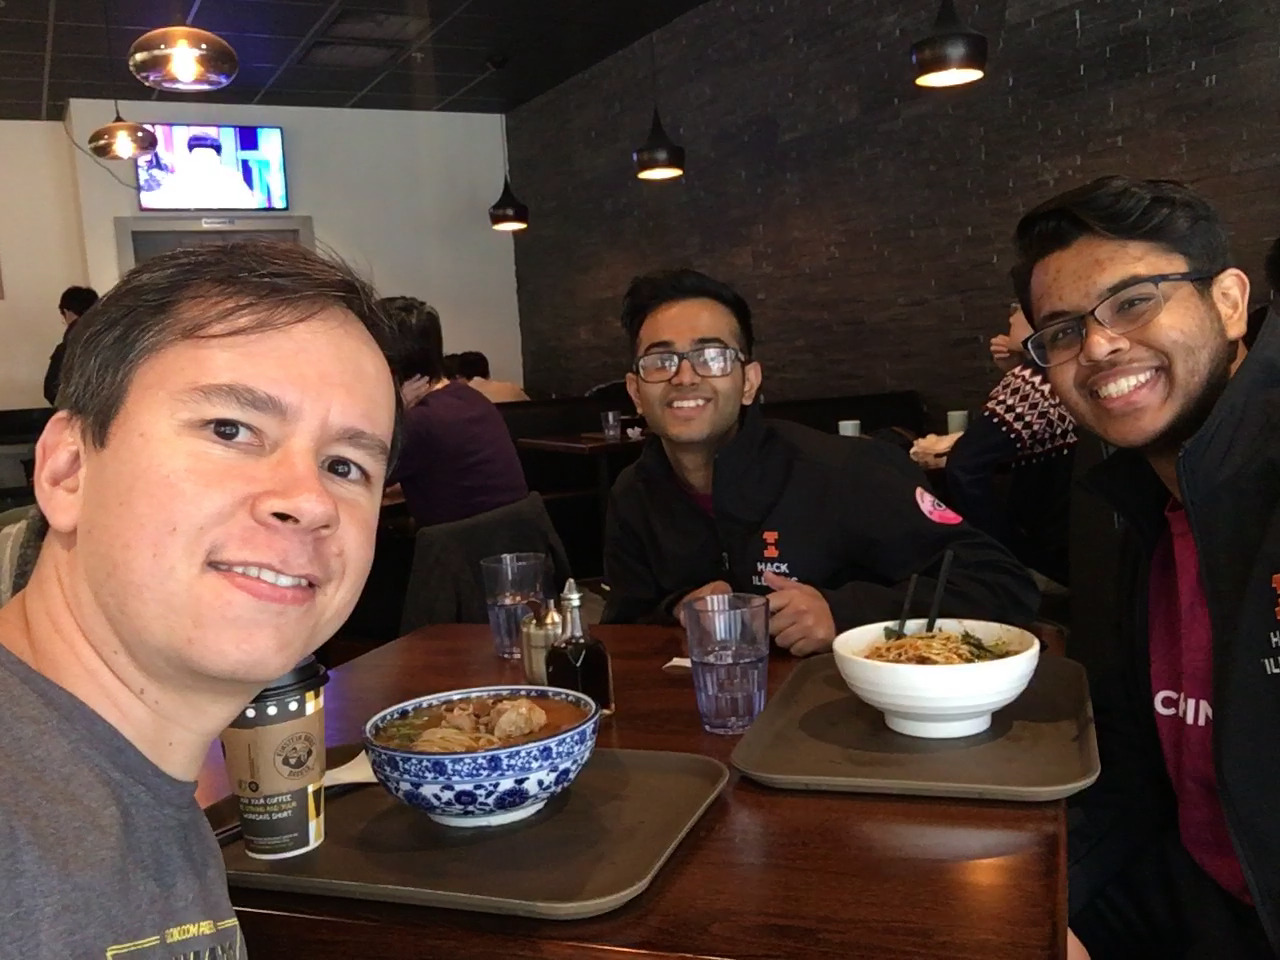 Pablo (left) has lunch with Shreyas and Kavi from HackIllinois staff (right) at Mid Summer Lounge